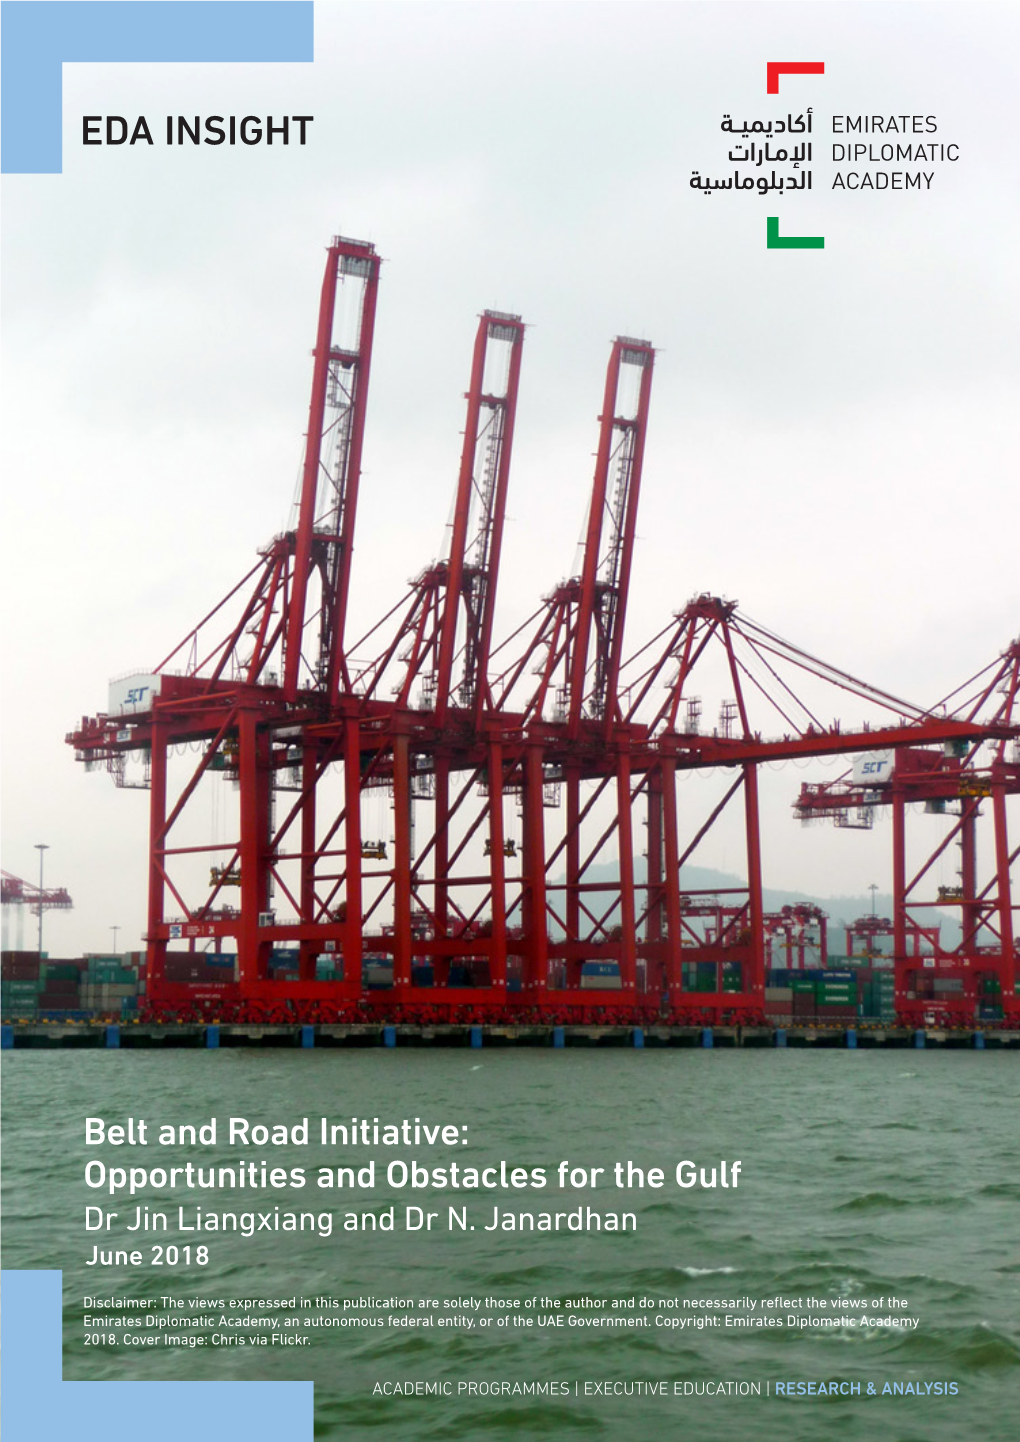 Belt and Road Initiative: Opportunities and Obstacles for the Gulf